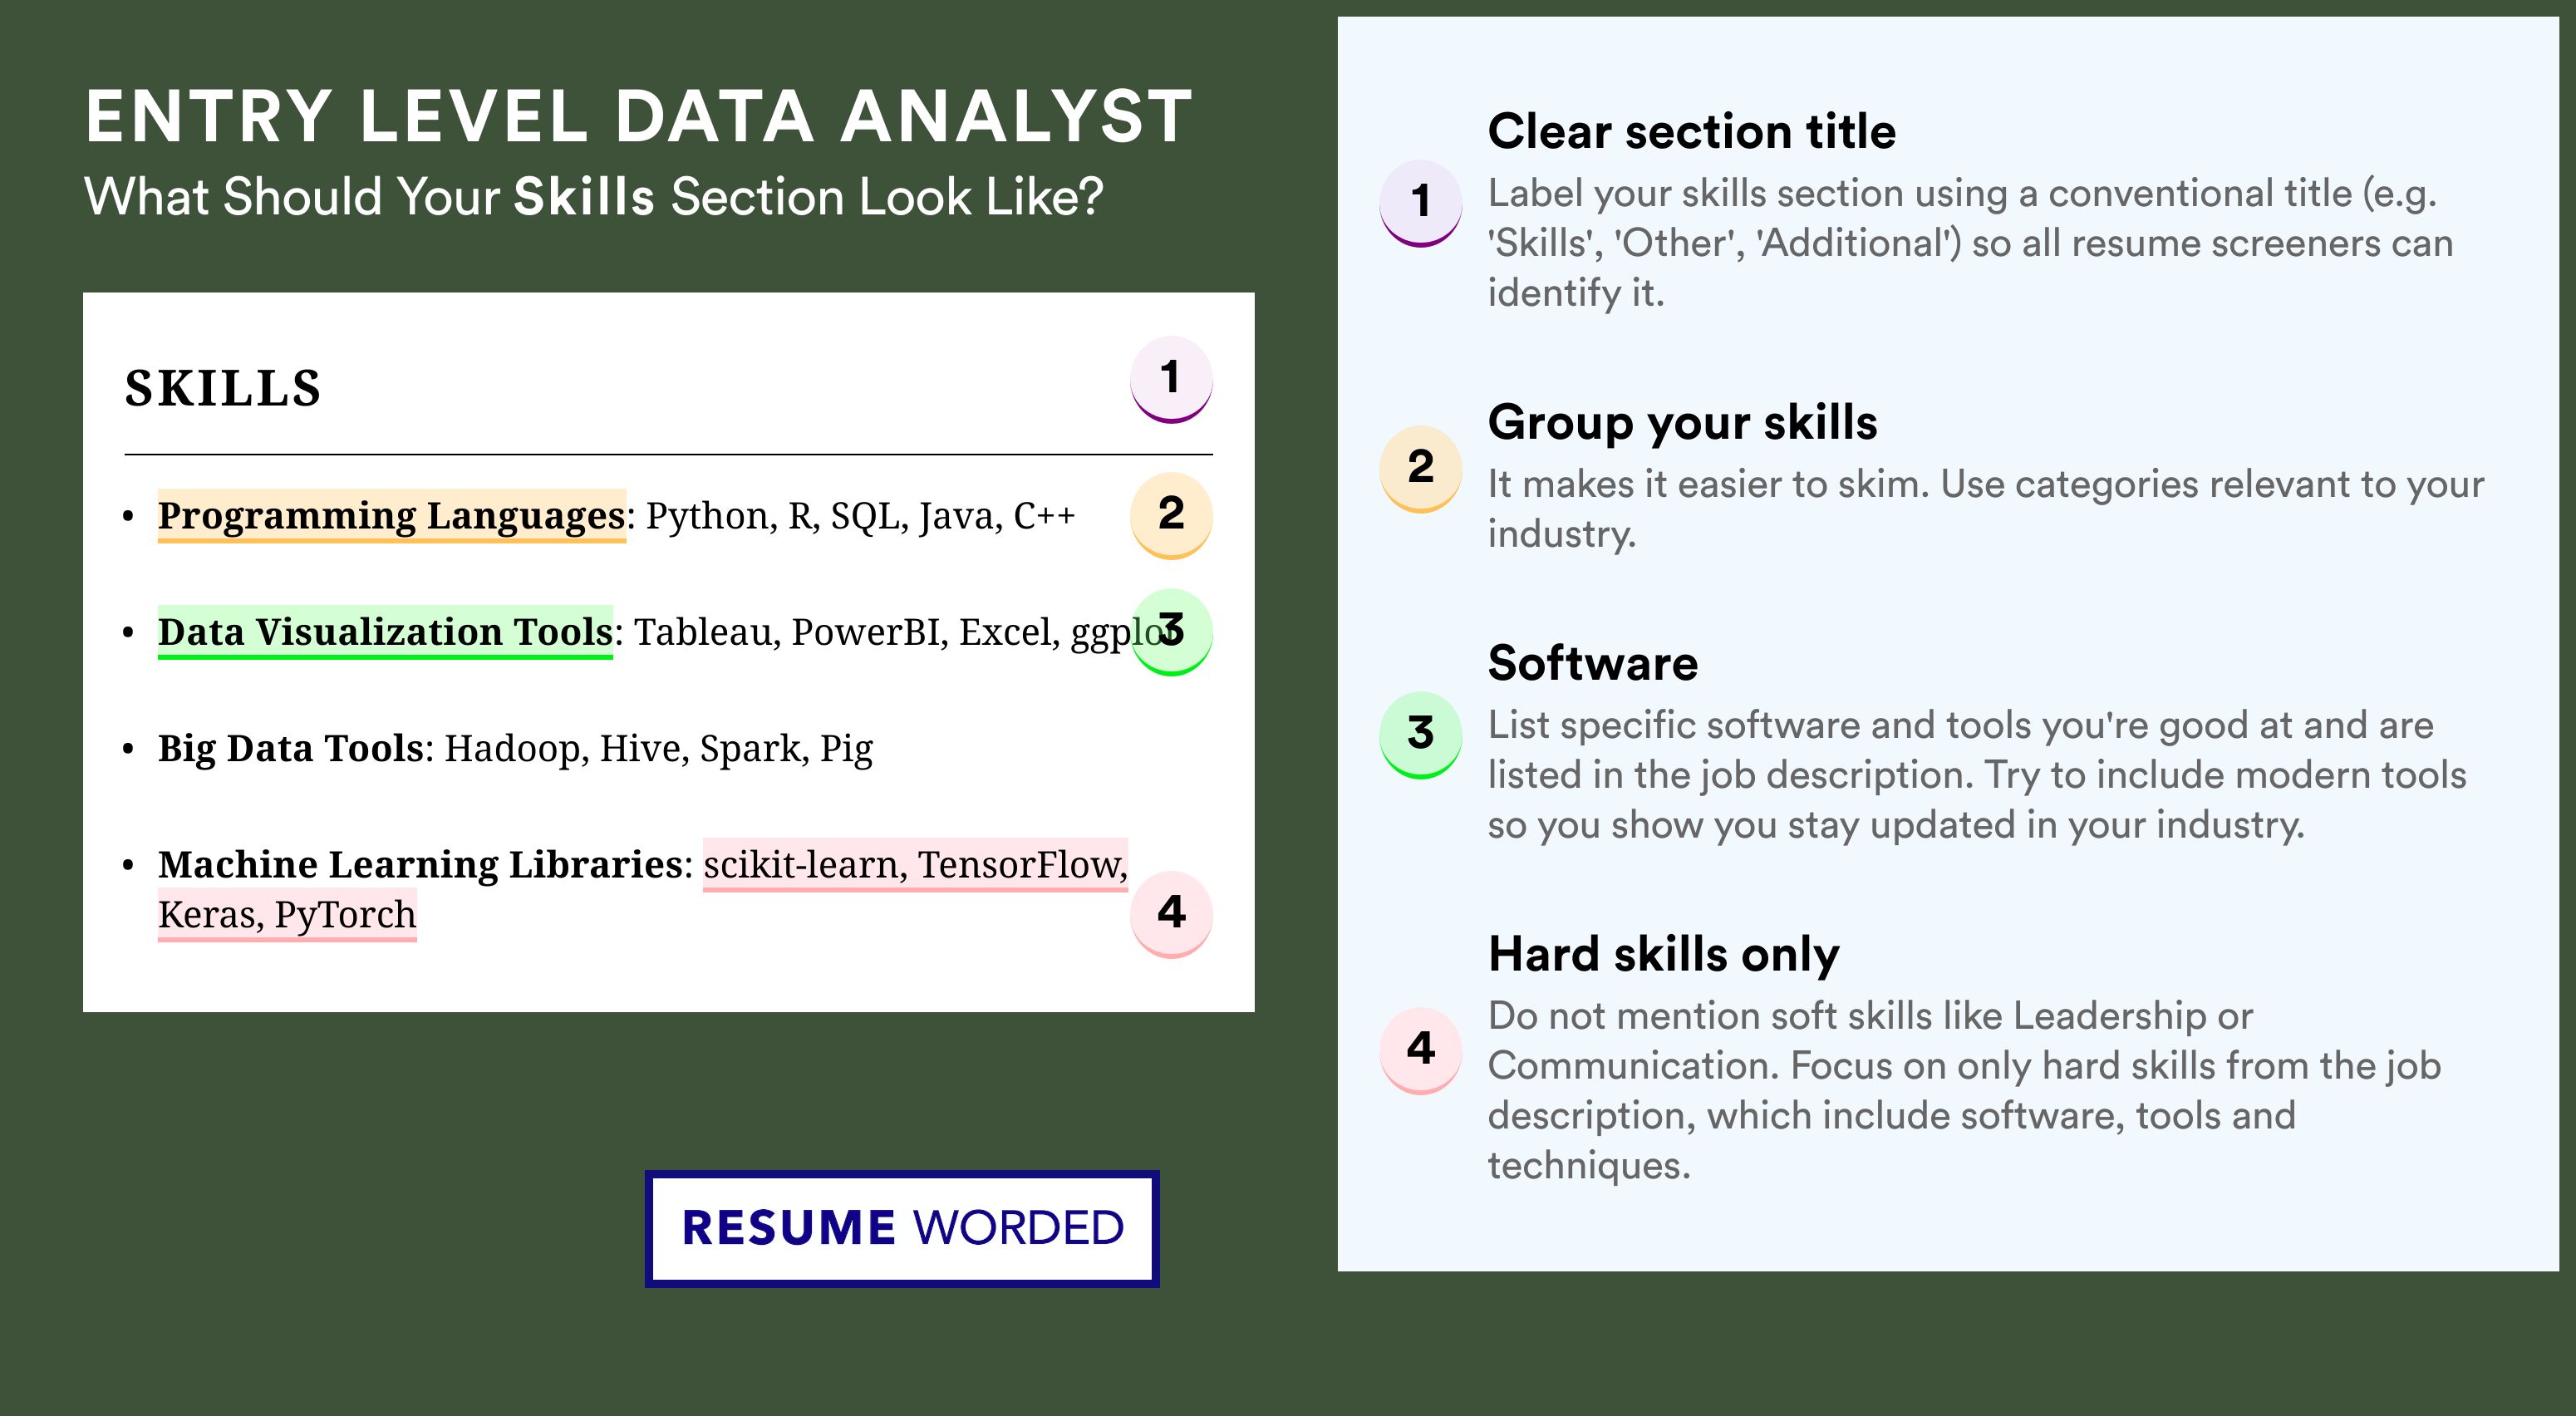 How To Write Your Skills Section - Entry Level Data Analyst Roles